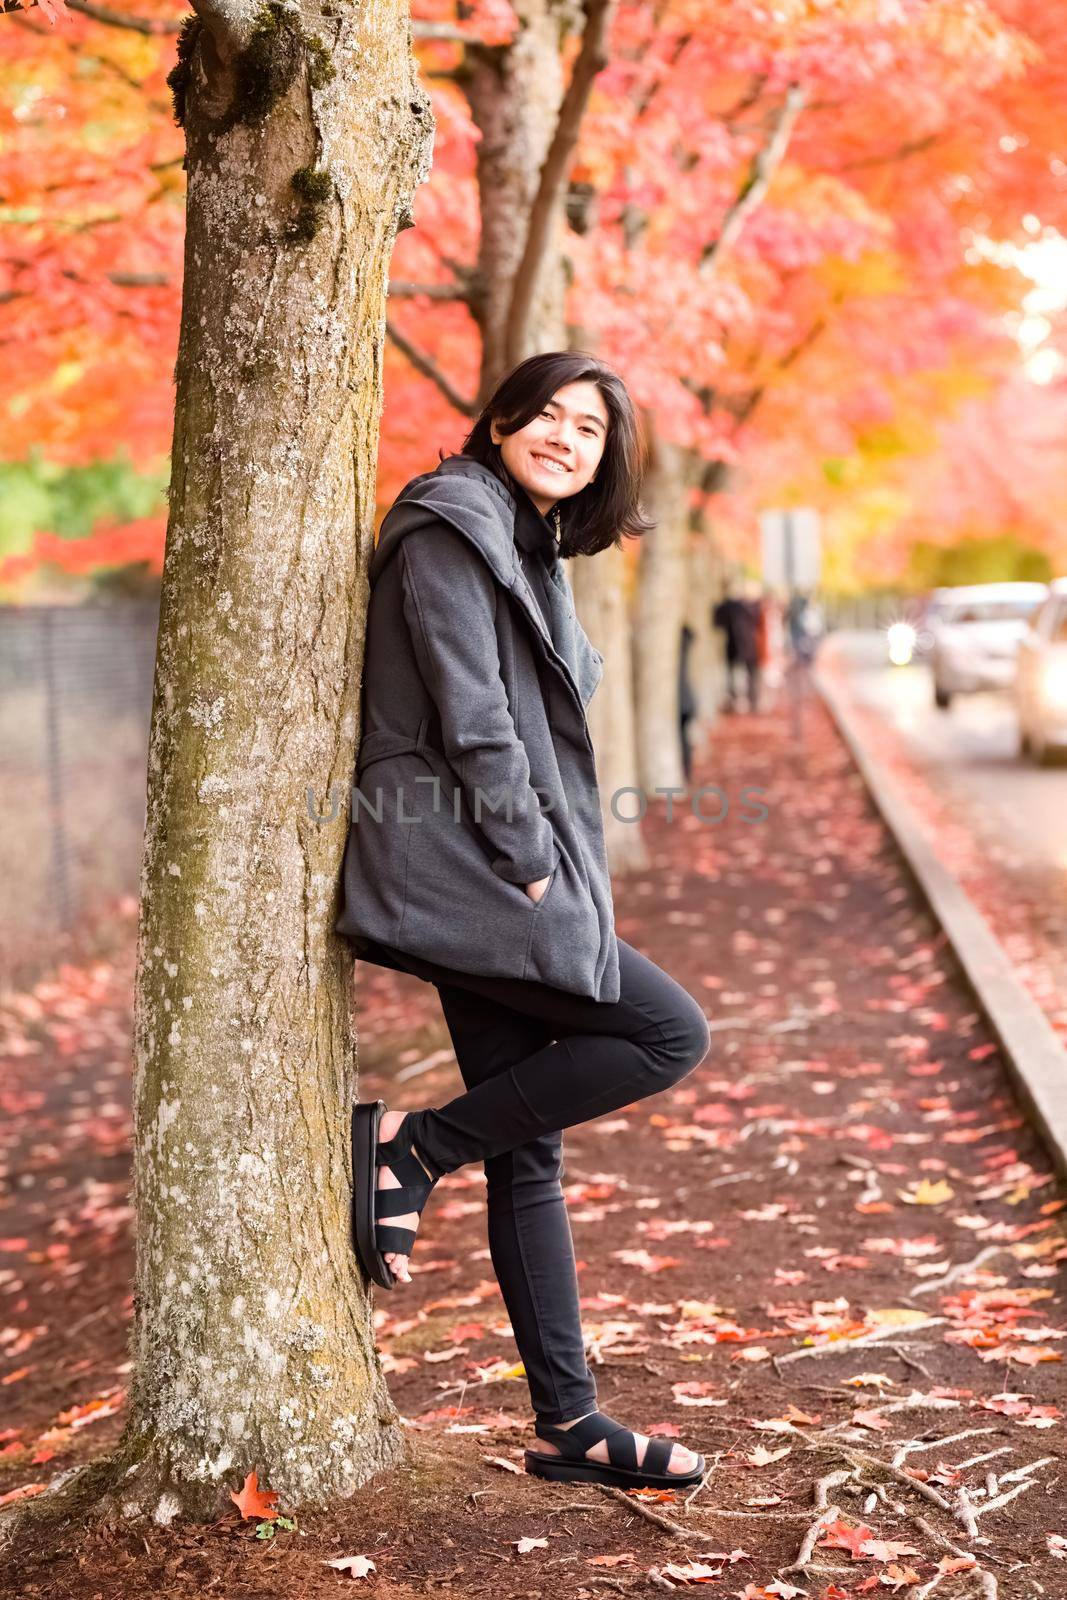 Smiling biracial teen girl or young adult female in gray jacket standing next to maple trees along road enjoying colorful autumn leaves